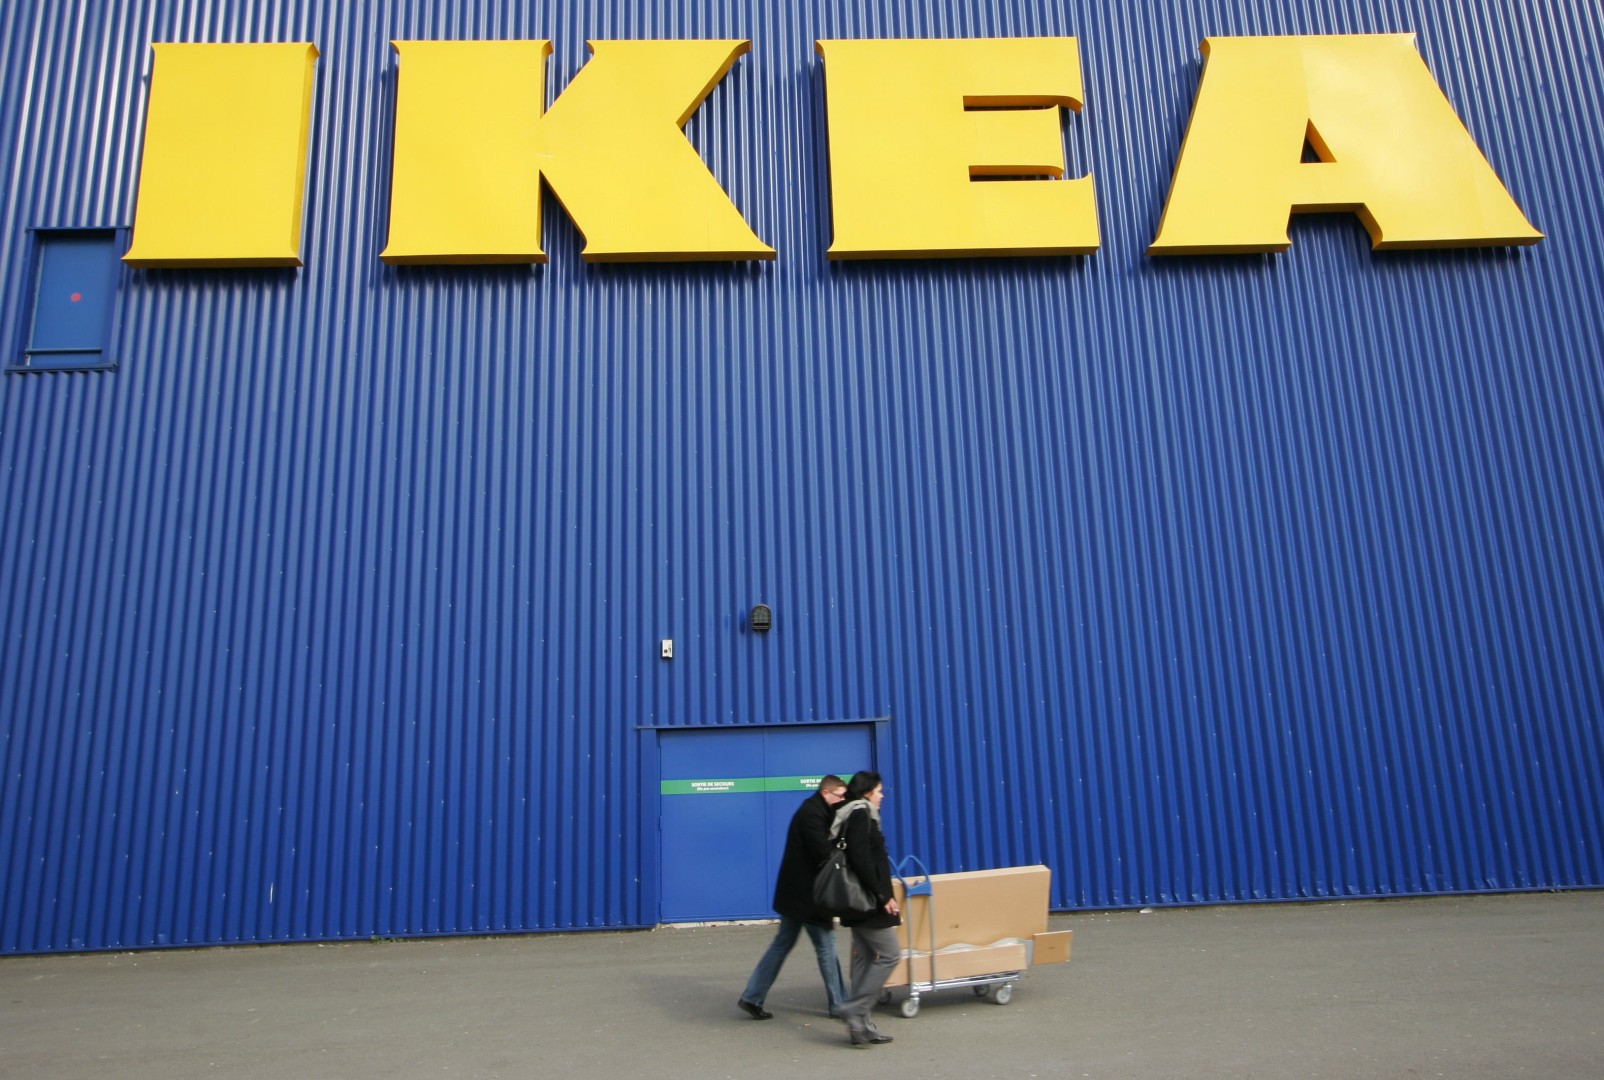 Stam staking Reserve Ikea forced to recall 'Sea of Japan' poster worldwide after Korean backlash  | South China Morning Post